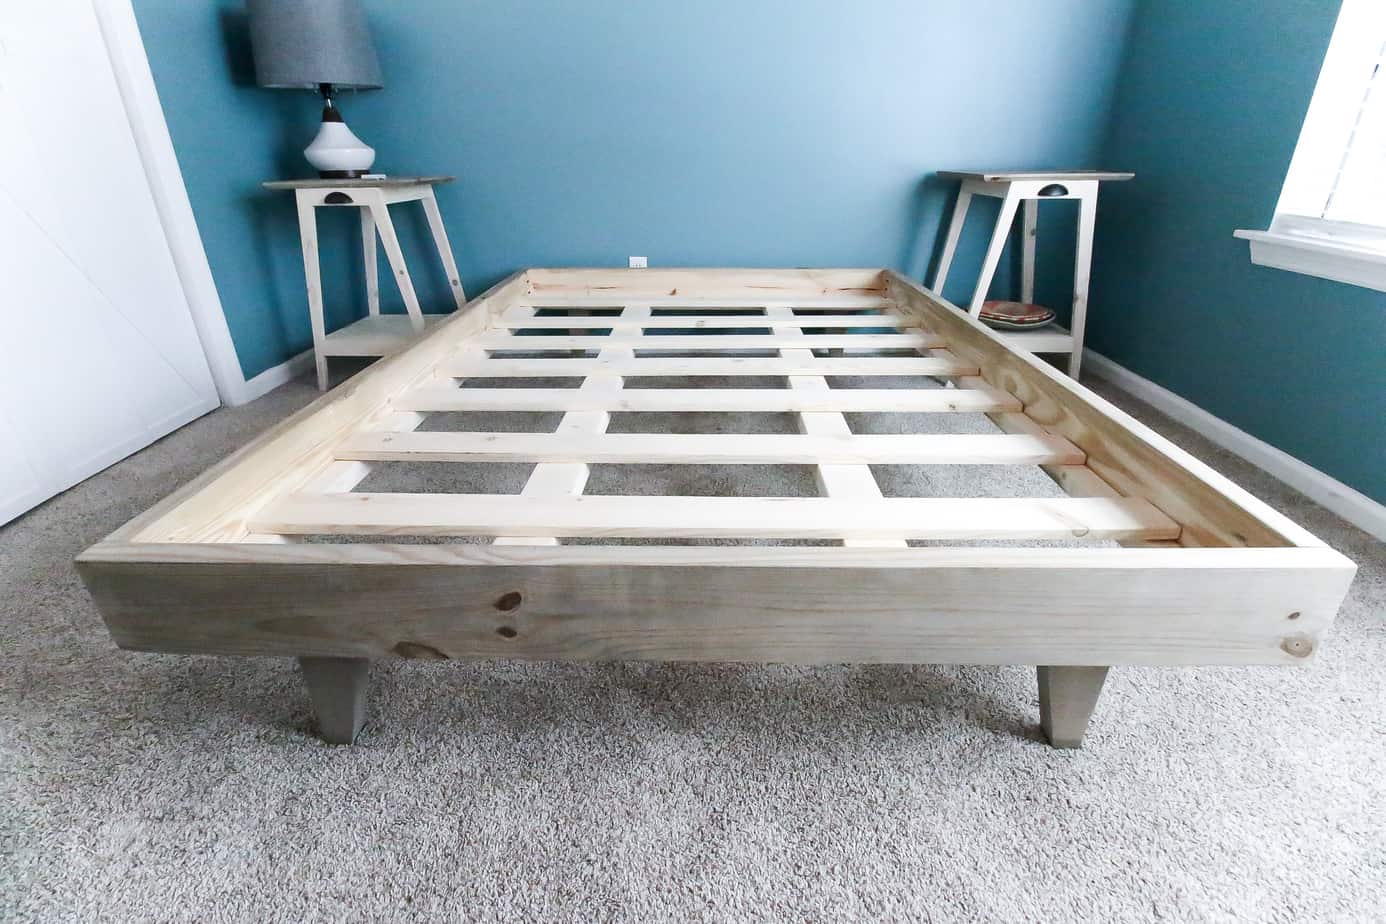 How to build a platform bed full size